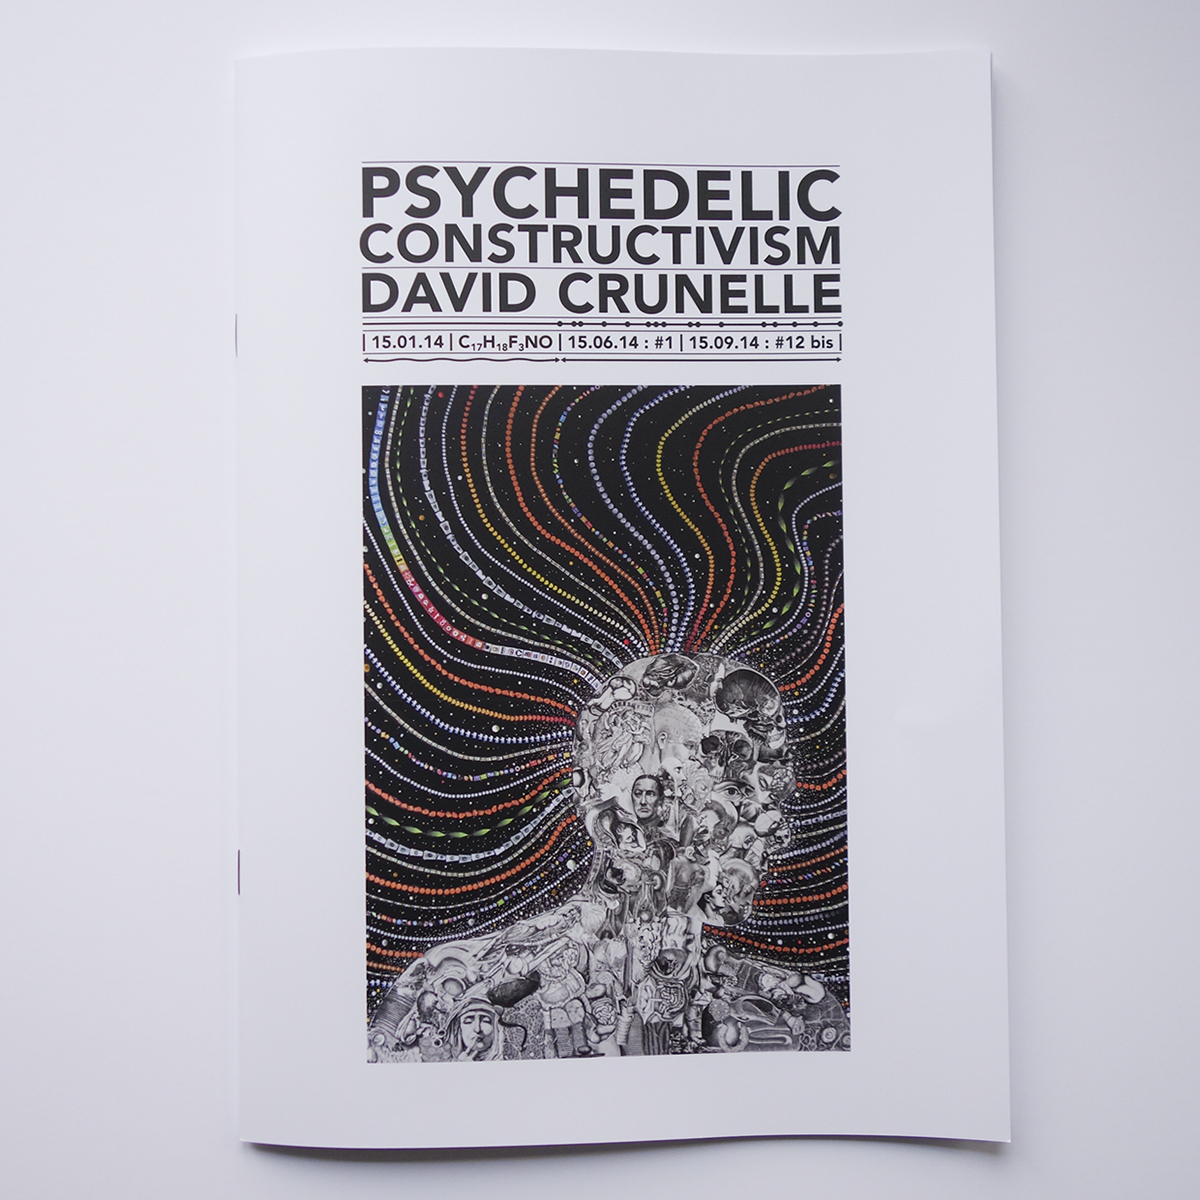 psychedelic constructivism collage animated gif timelapse